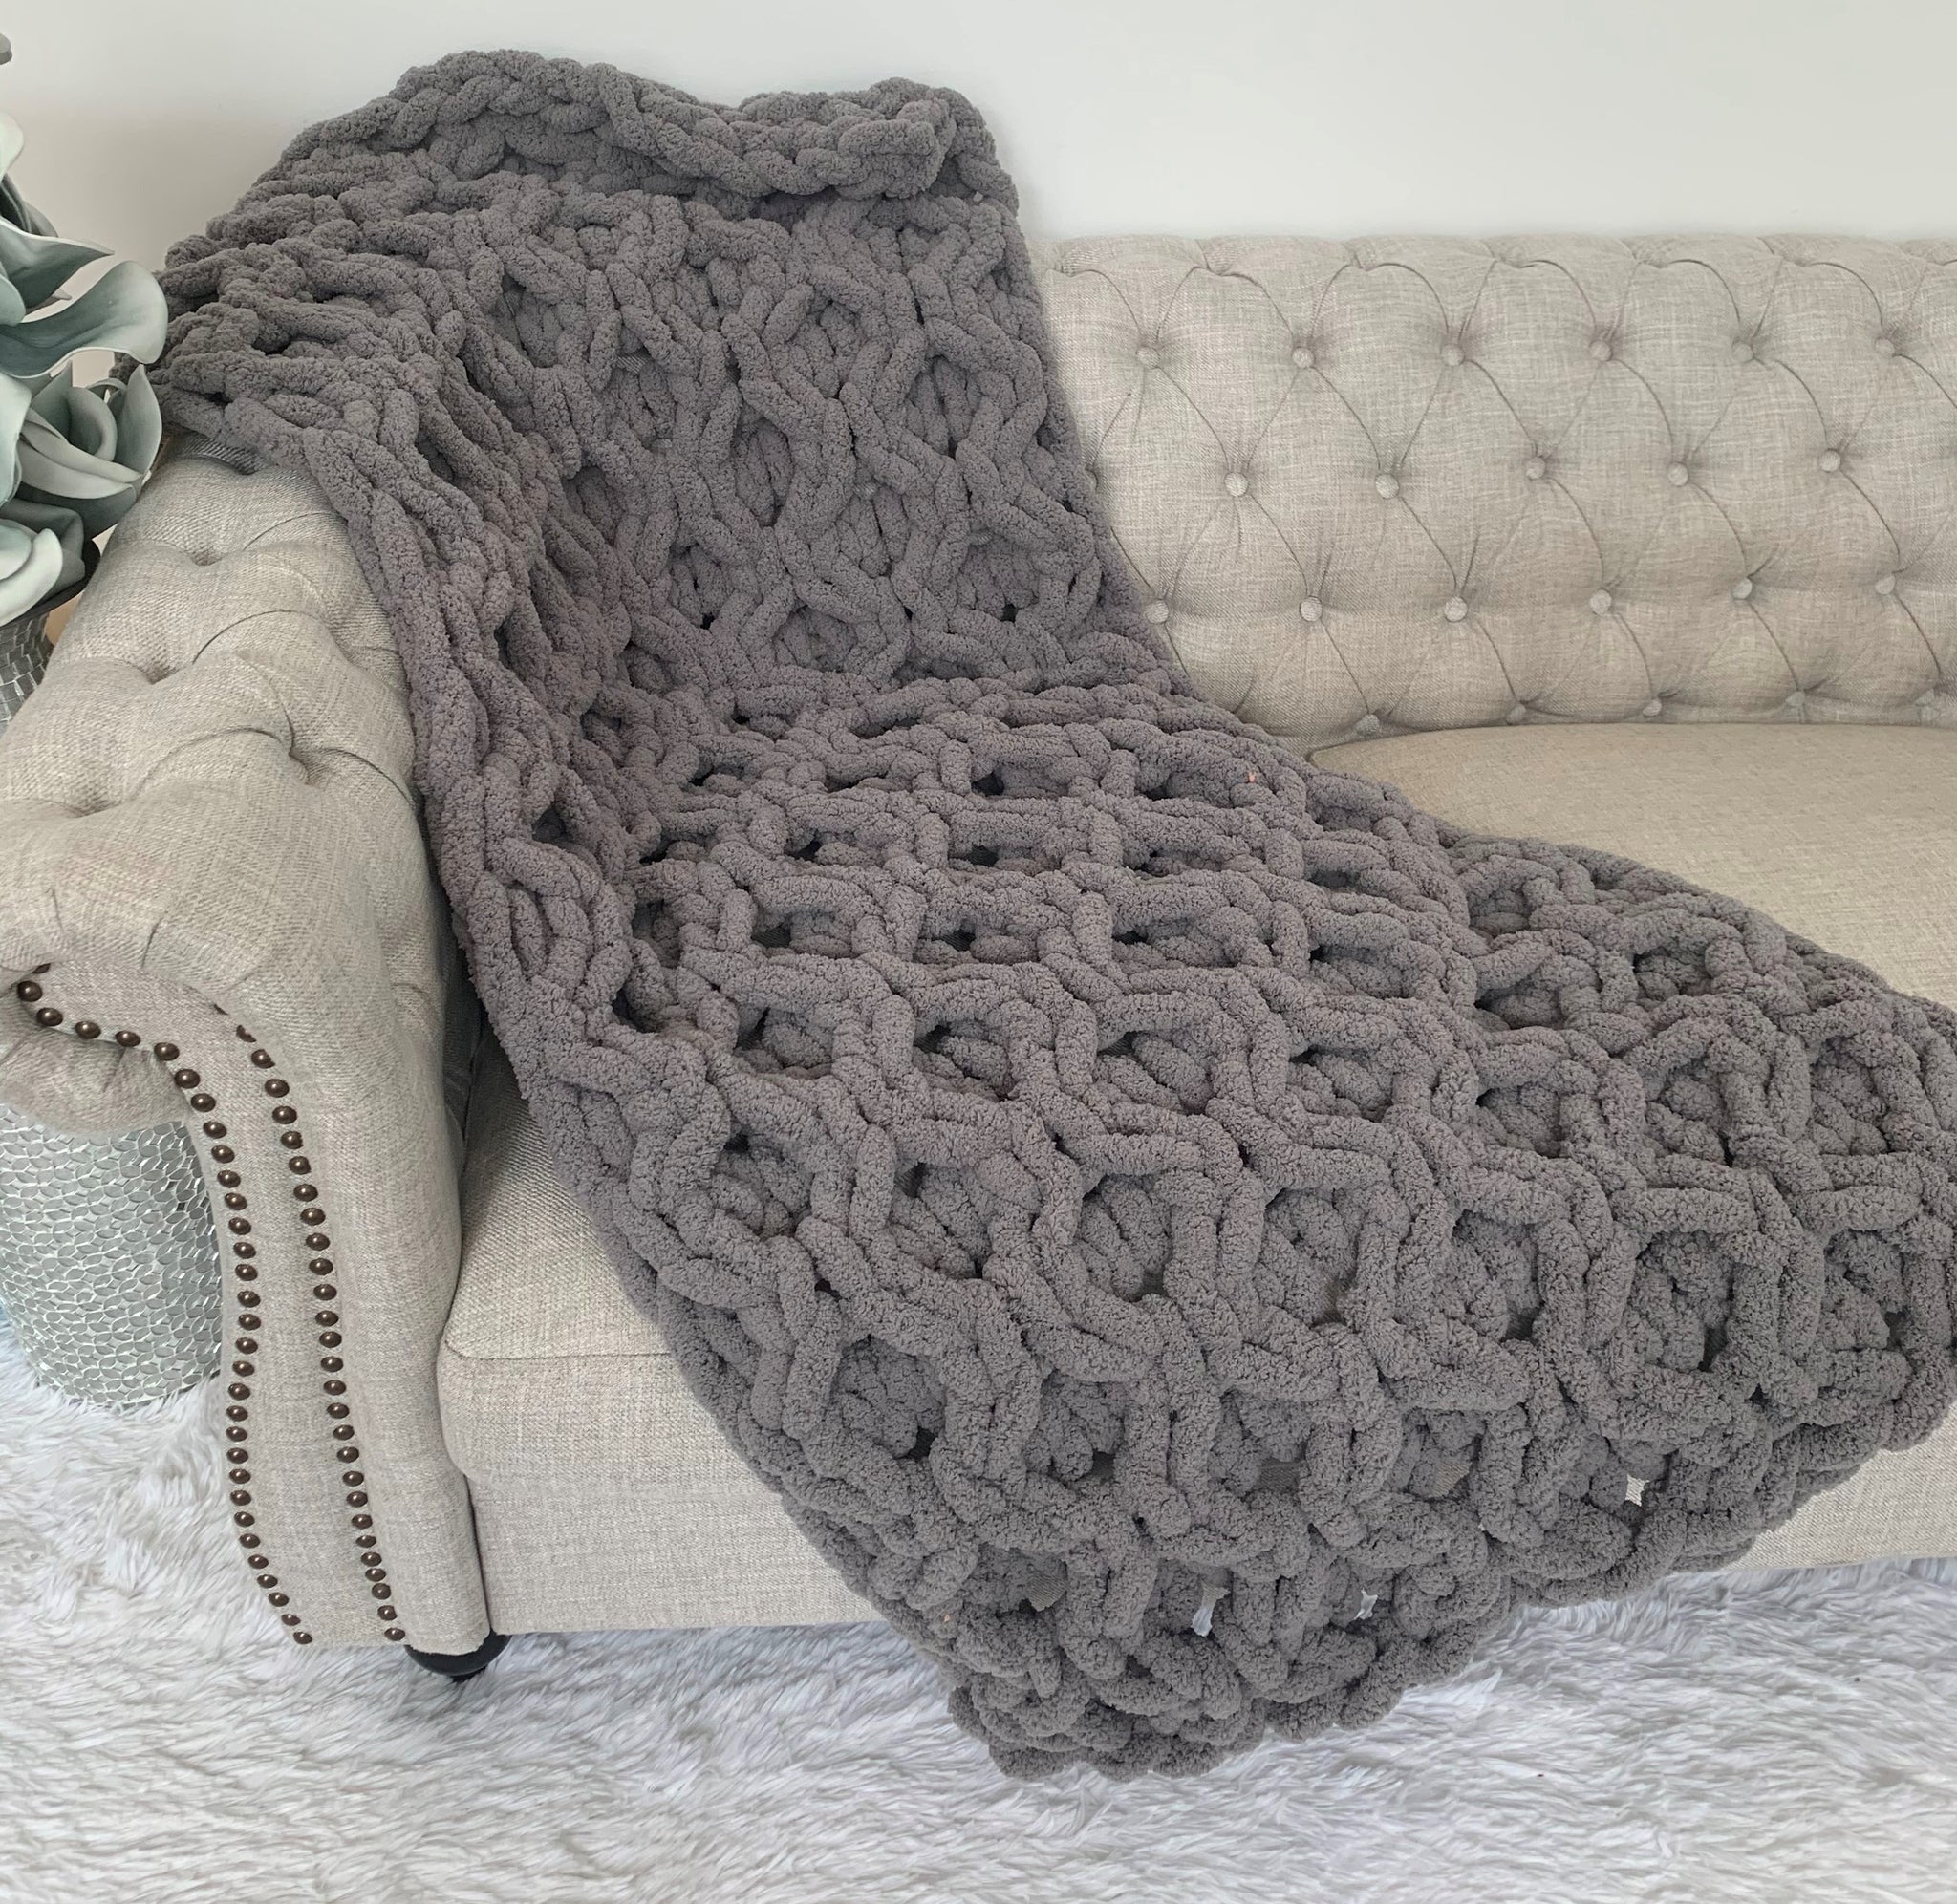 Honeycomb Blanket Crochet Kit. Chunky Throw Crochet Kit. Hexagonal Throw.  Easy Crochet Kit by Wool Couture 